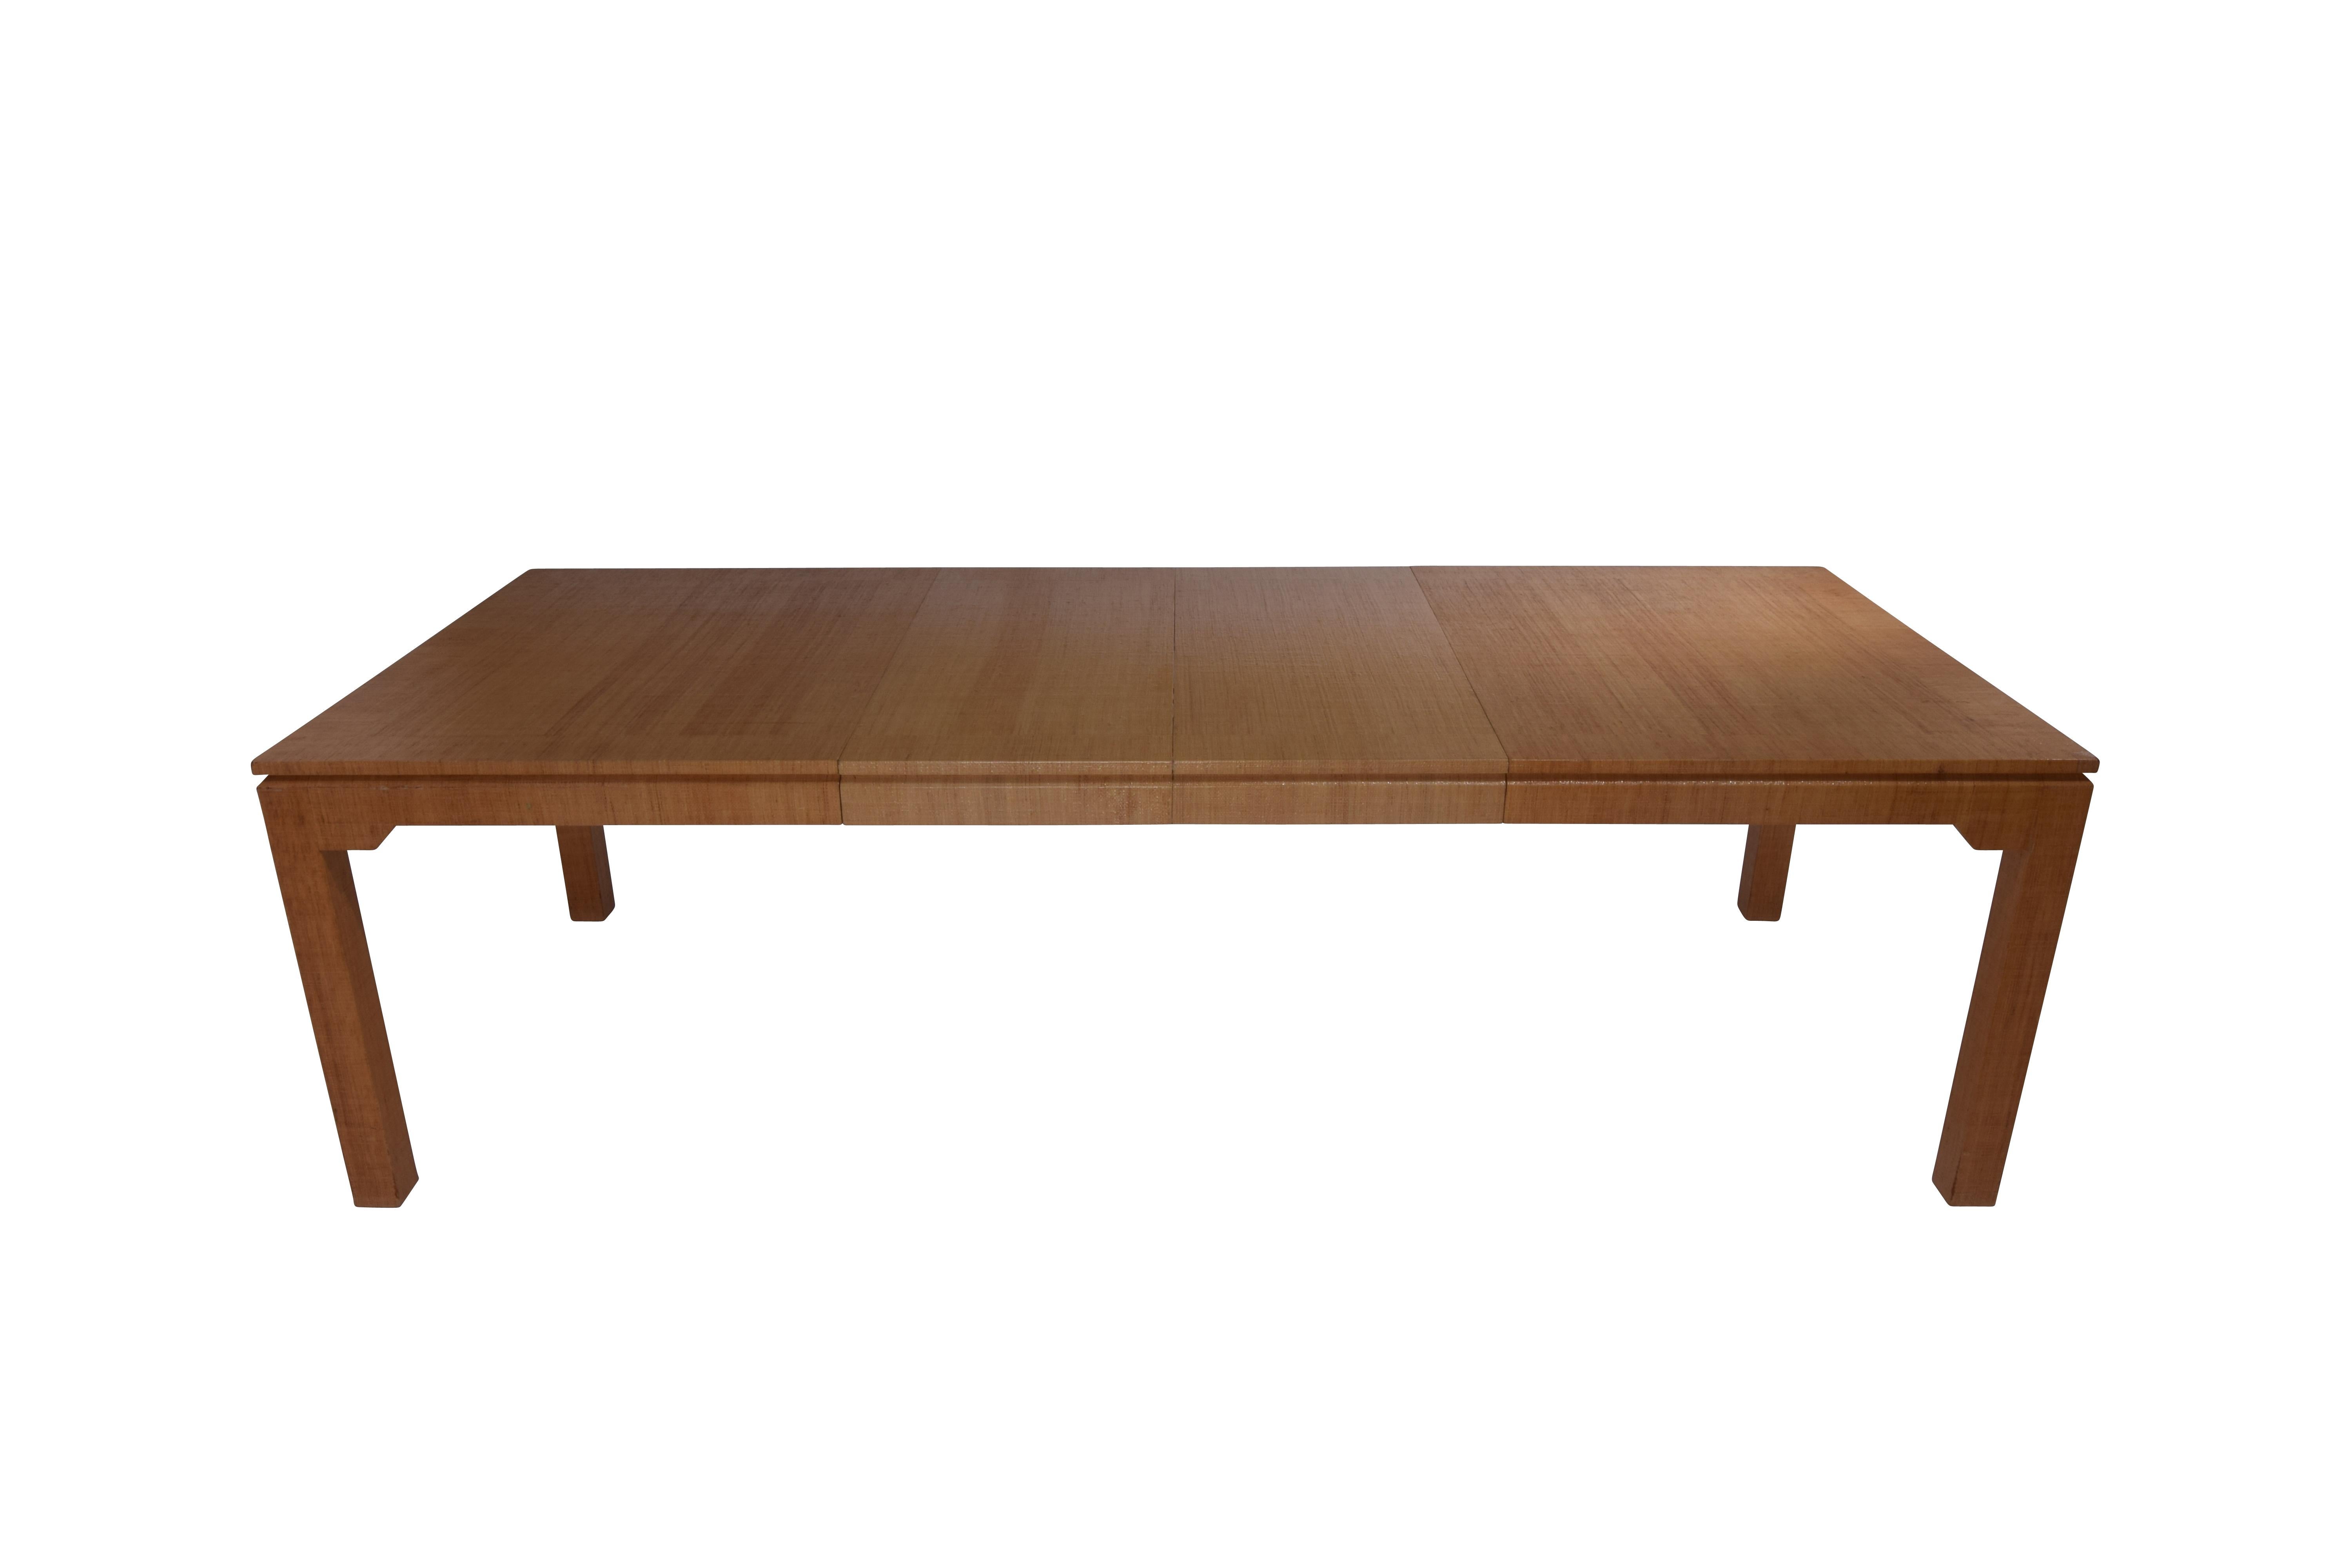 Post-Modern Grasscloth Covered Dining Table